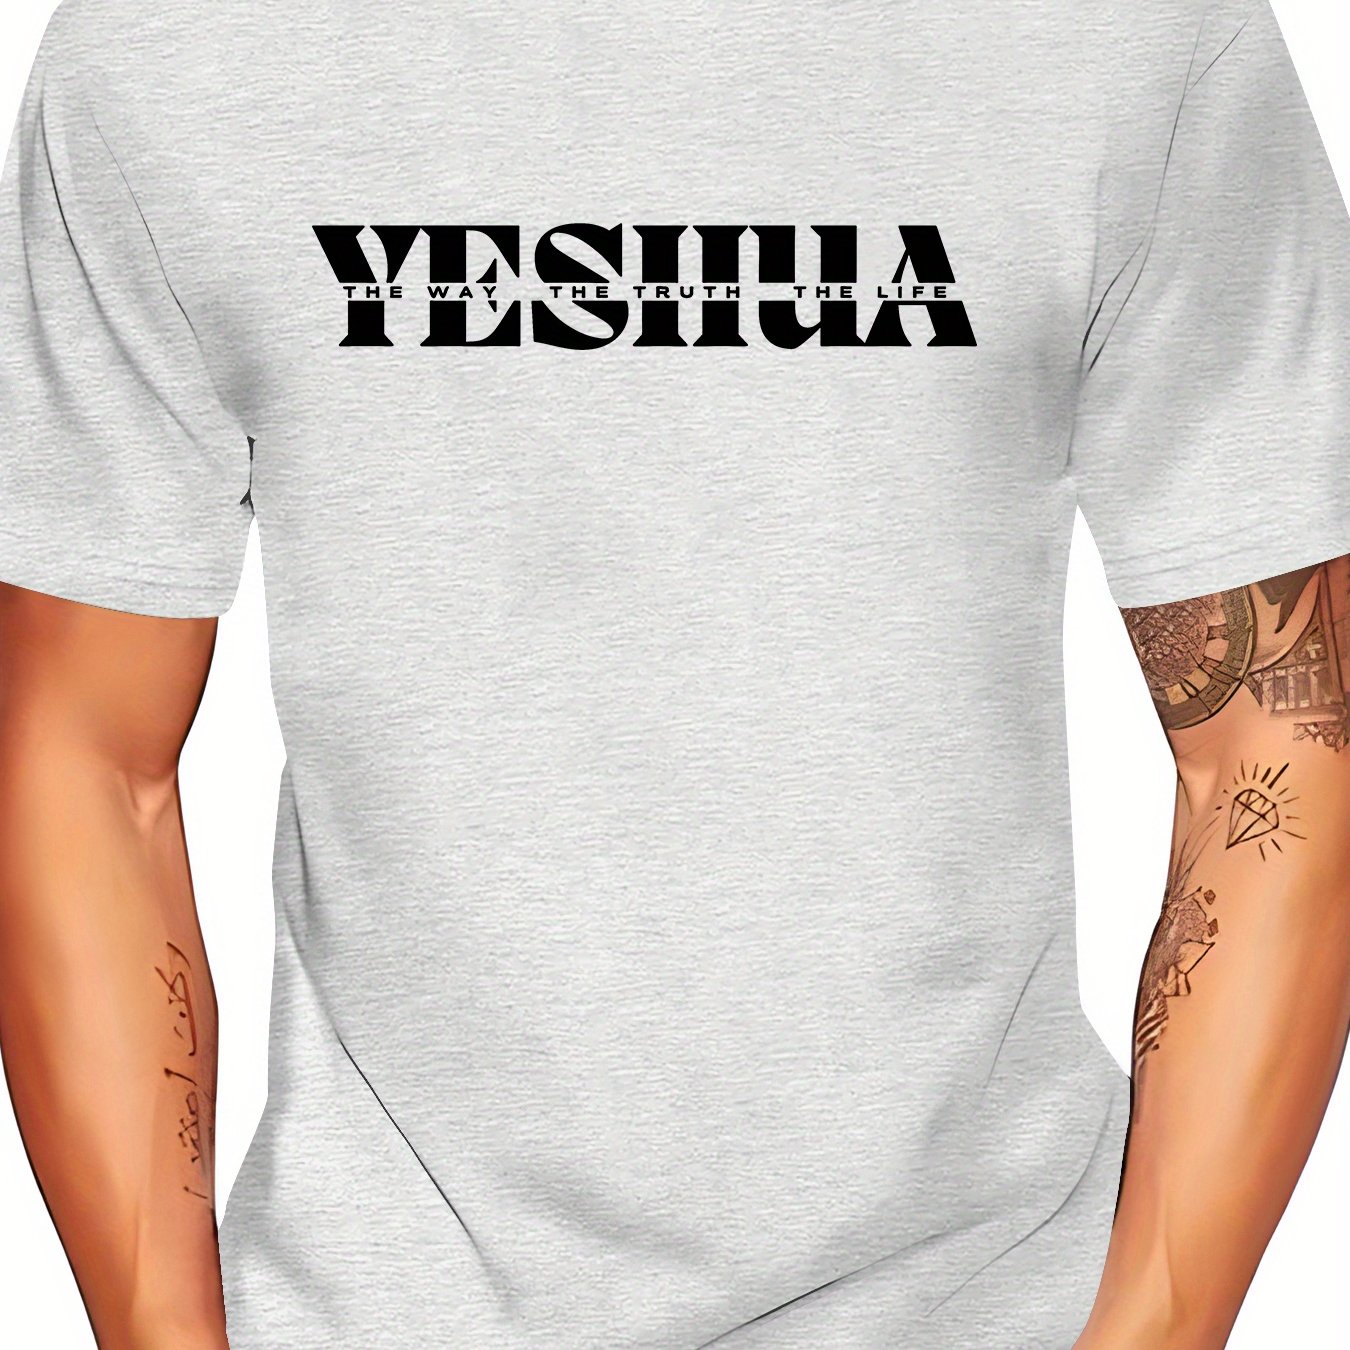 Yeshua The Way The Truth The Life Men's Christian T-shirt claimedbygoddesigns